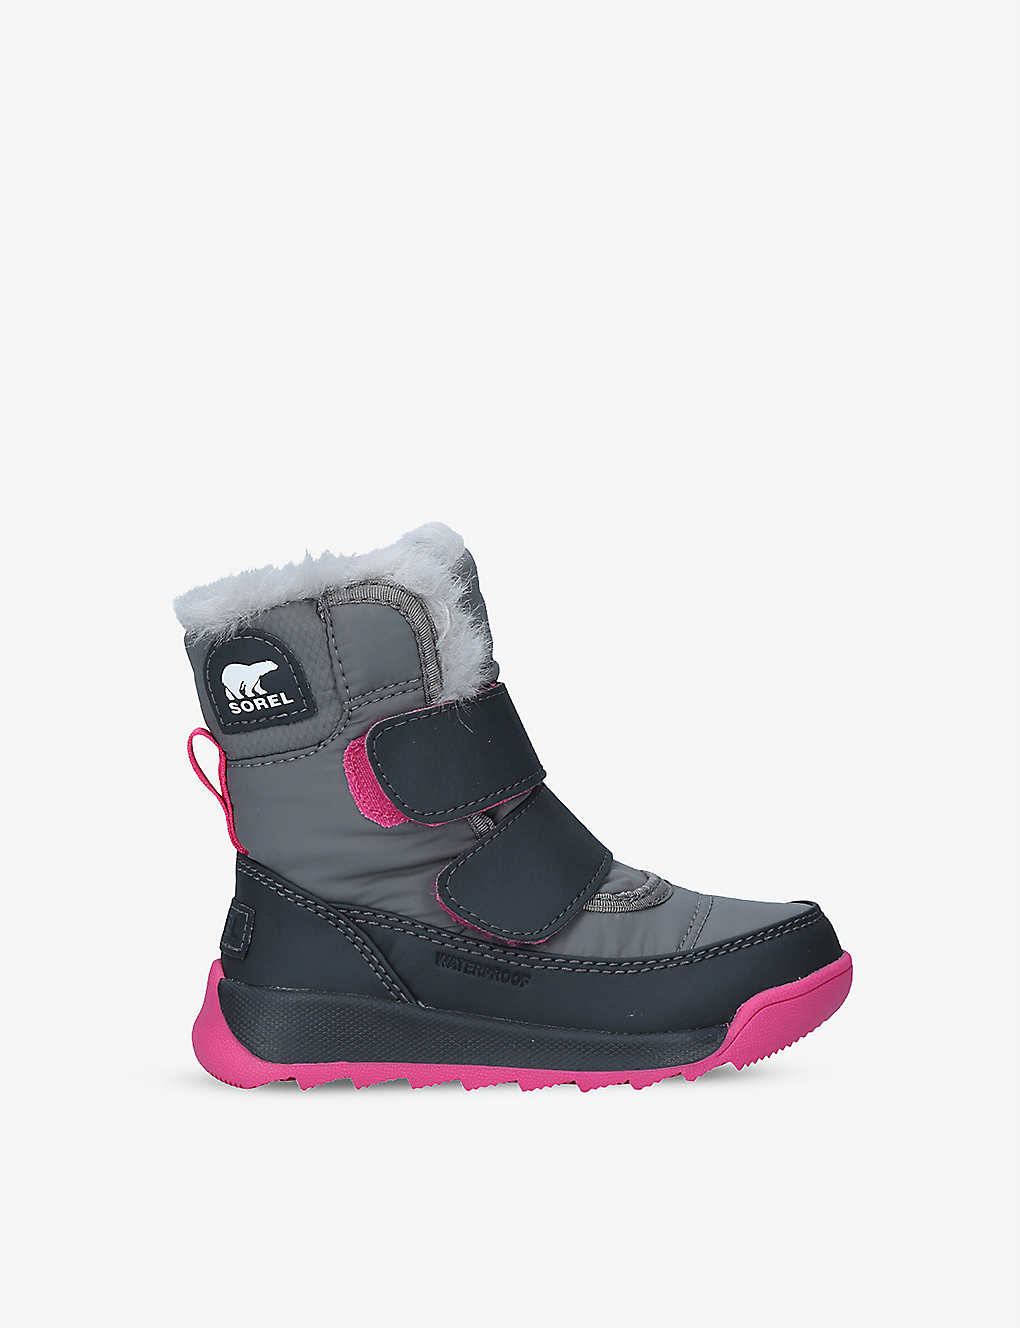 Selfridges & Co Girls Shoes Boots Snow Boots Youth Whitney nylon shell boots 7-10 years 